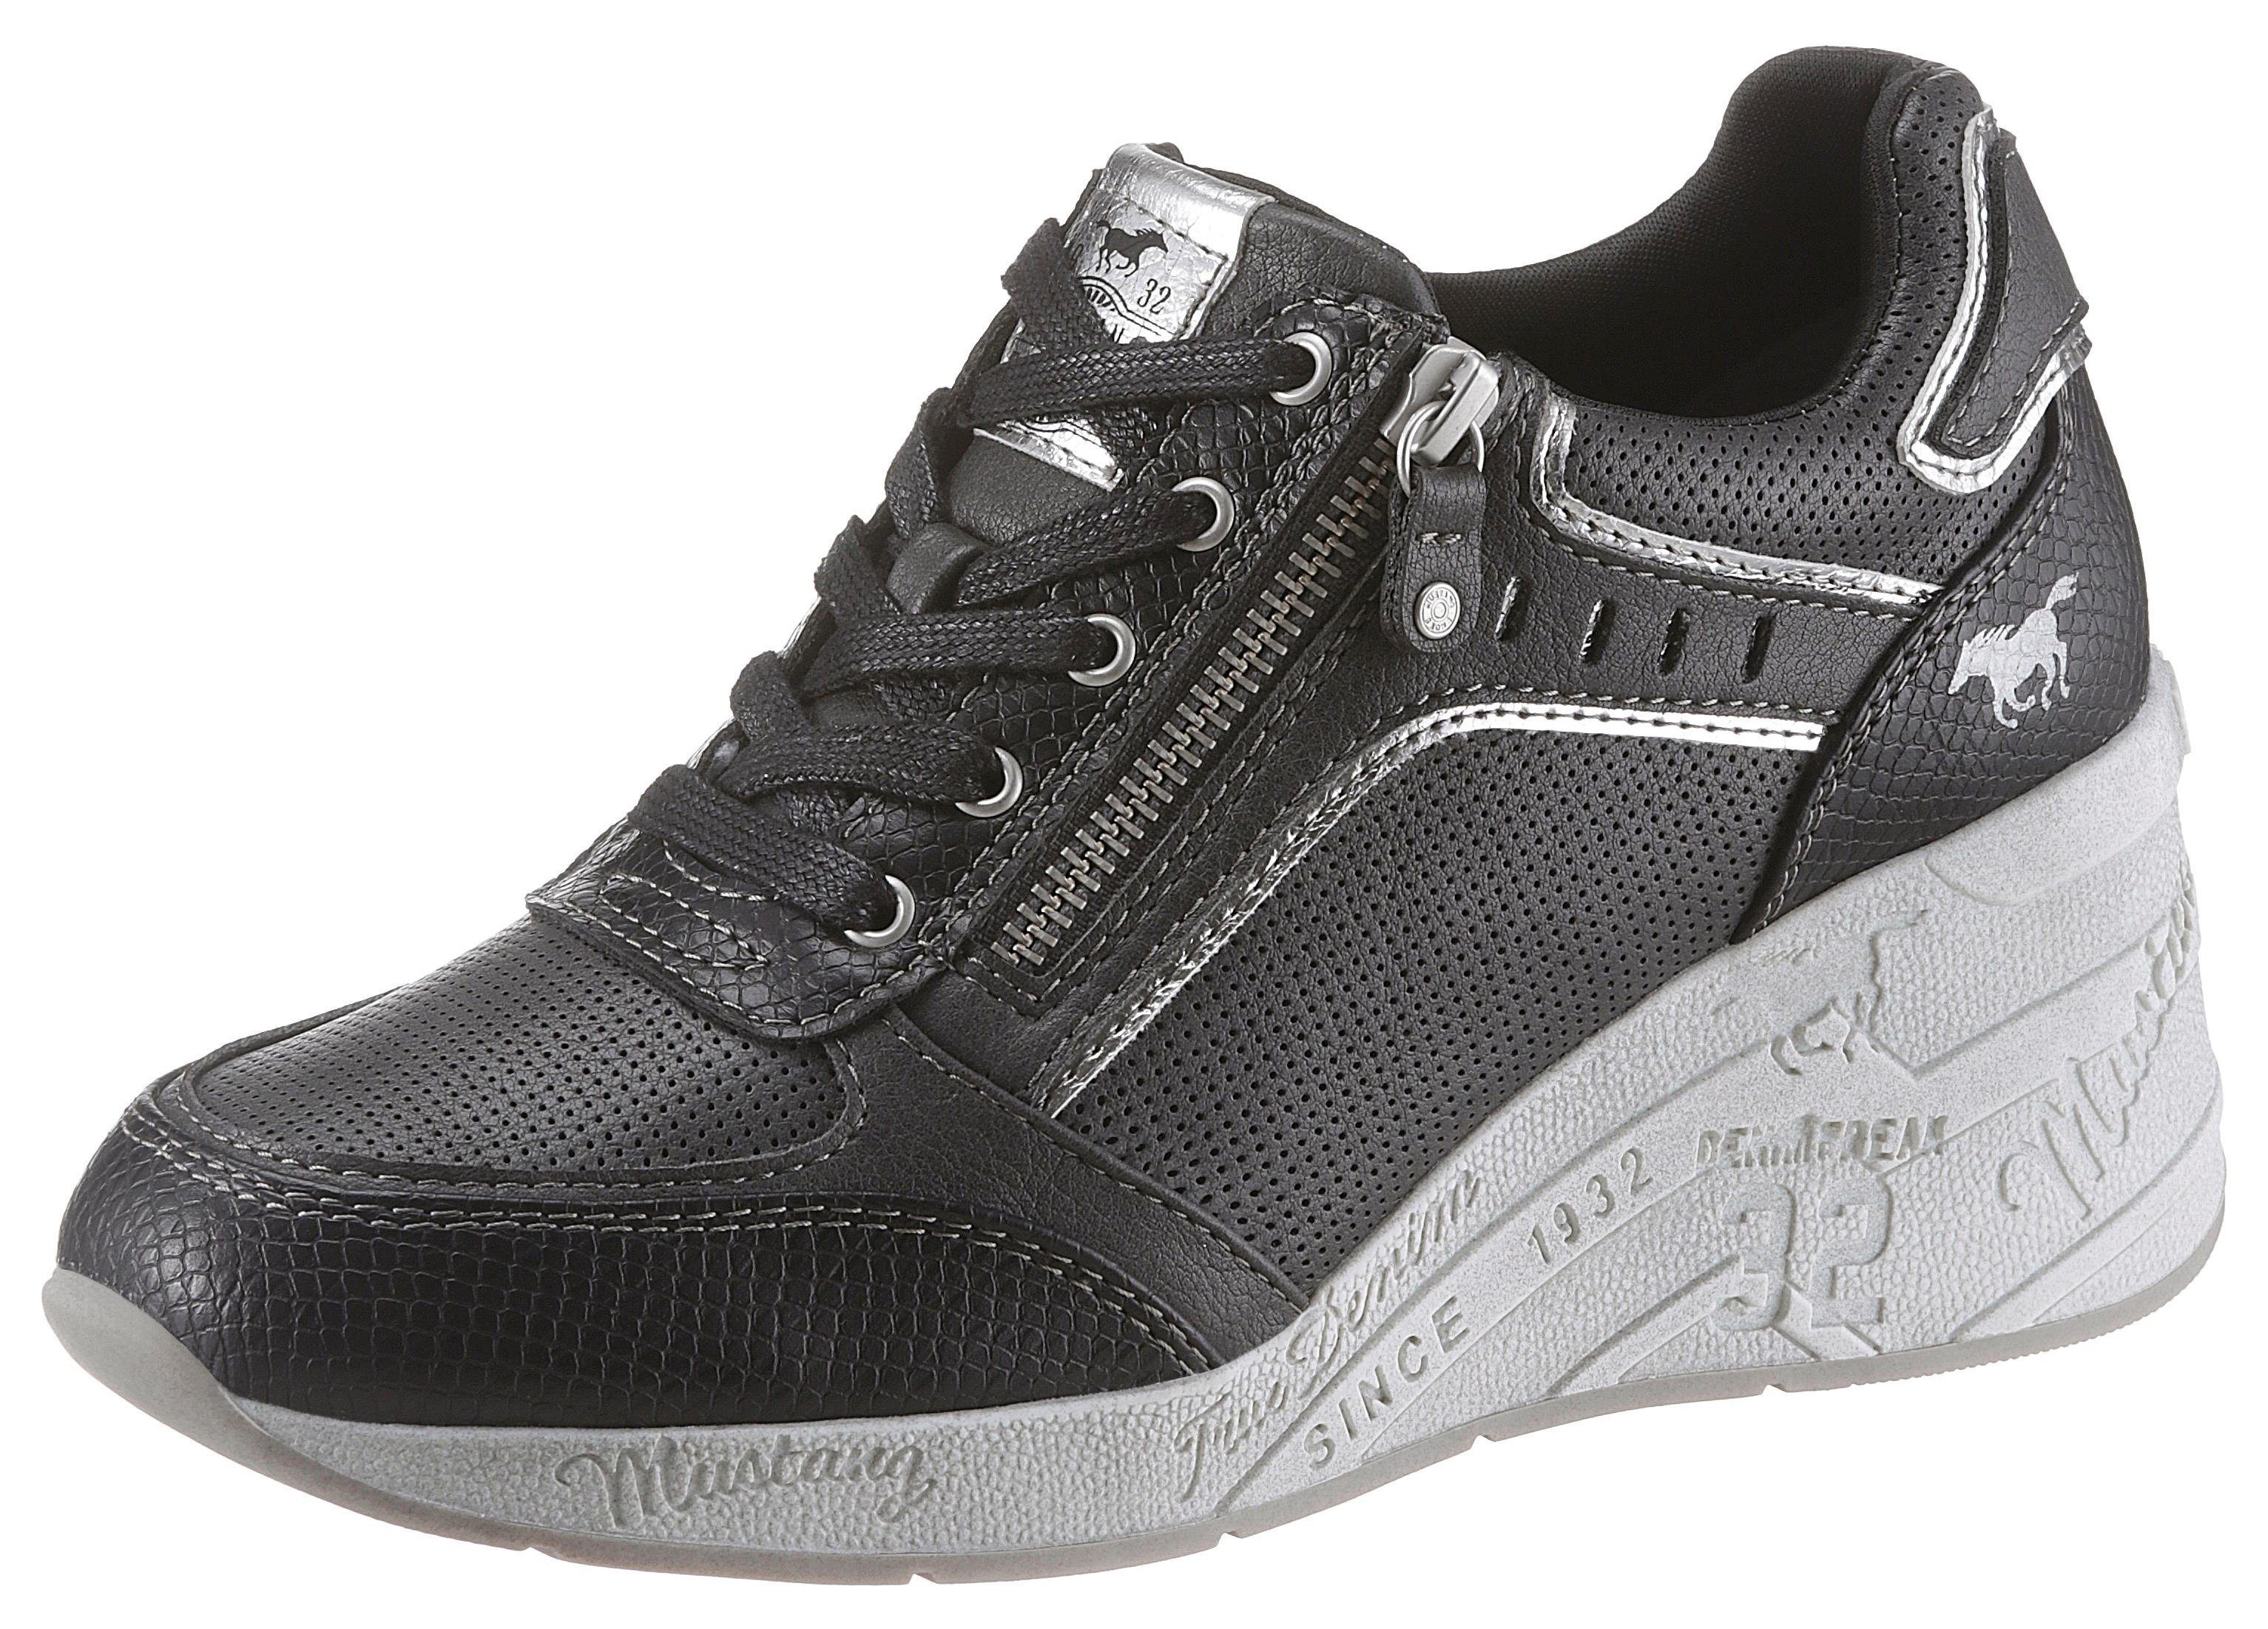 Mustang Shoes Wedgesneaker mit feiner Perforation | OTTO